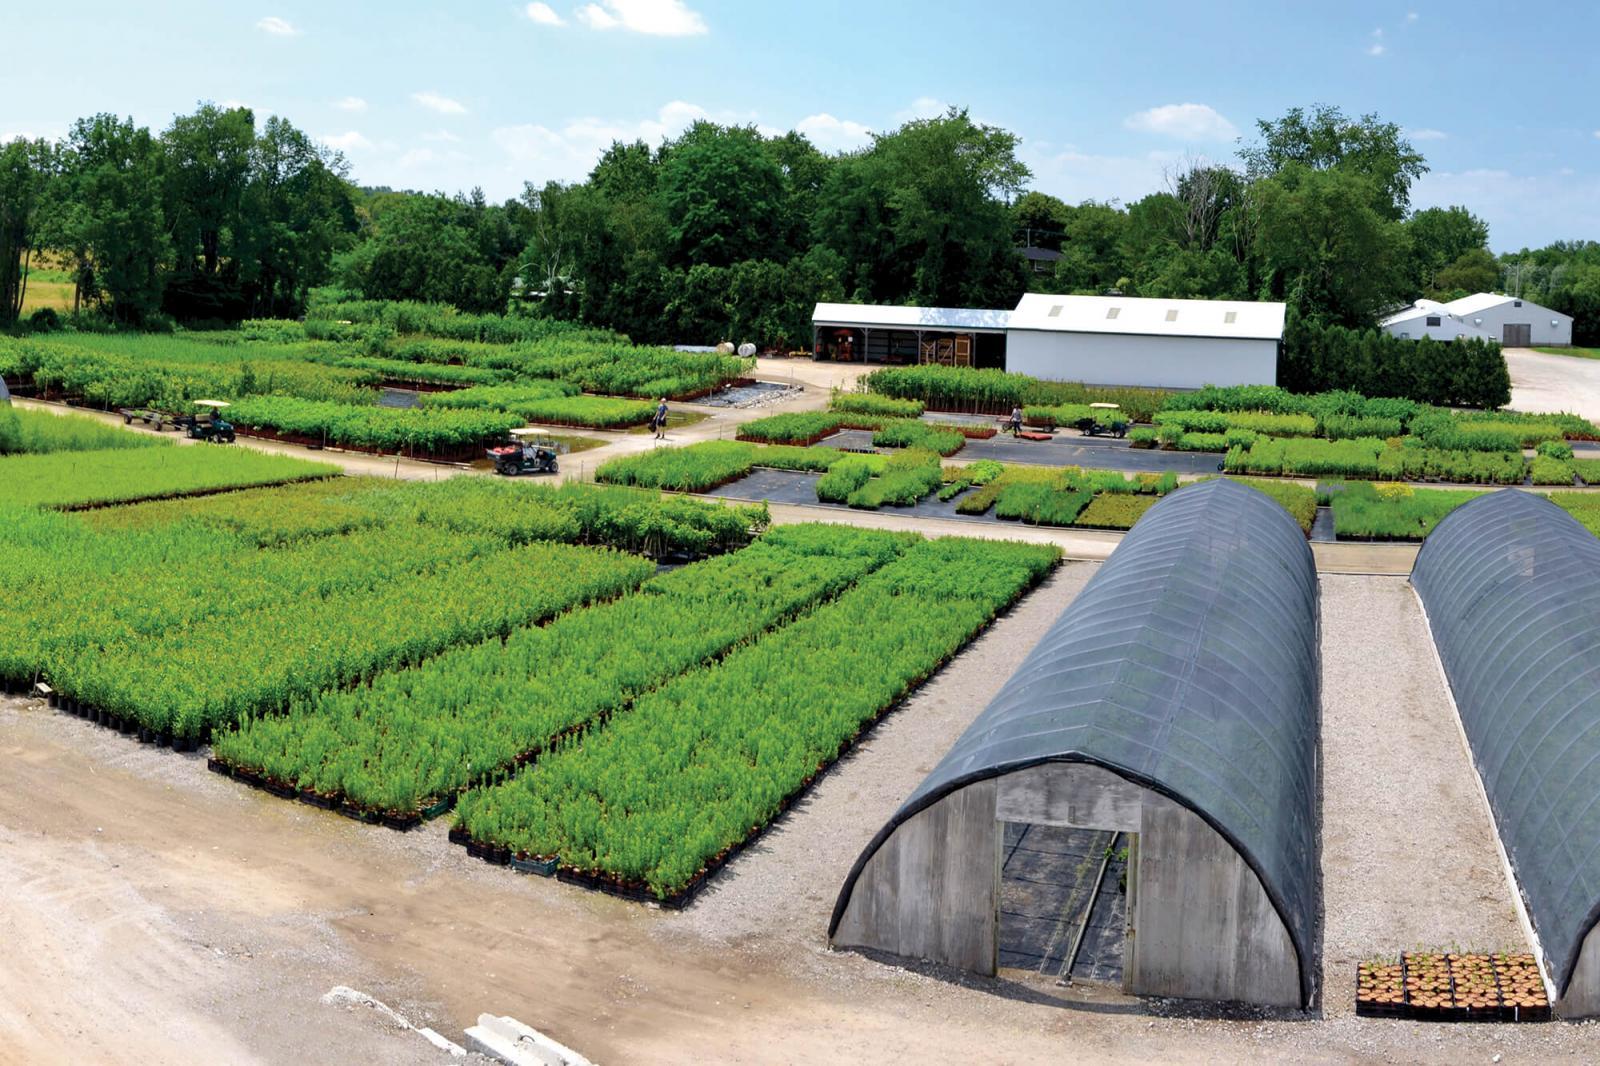 Verbinnen’s Nursery grows about 120 varieties of native trees and shrubs on 26 acres near Dundas.